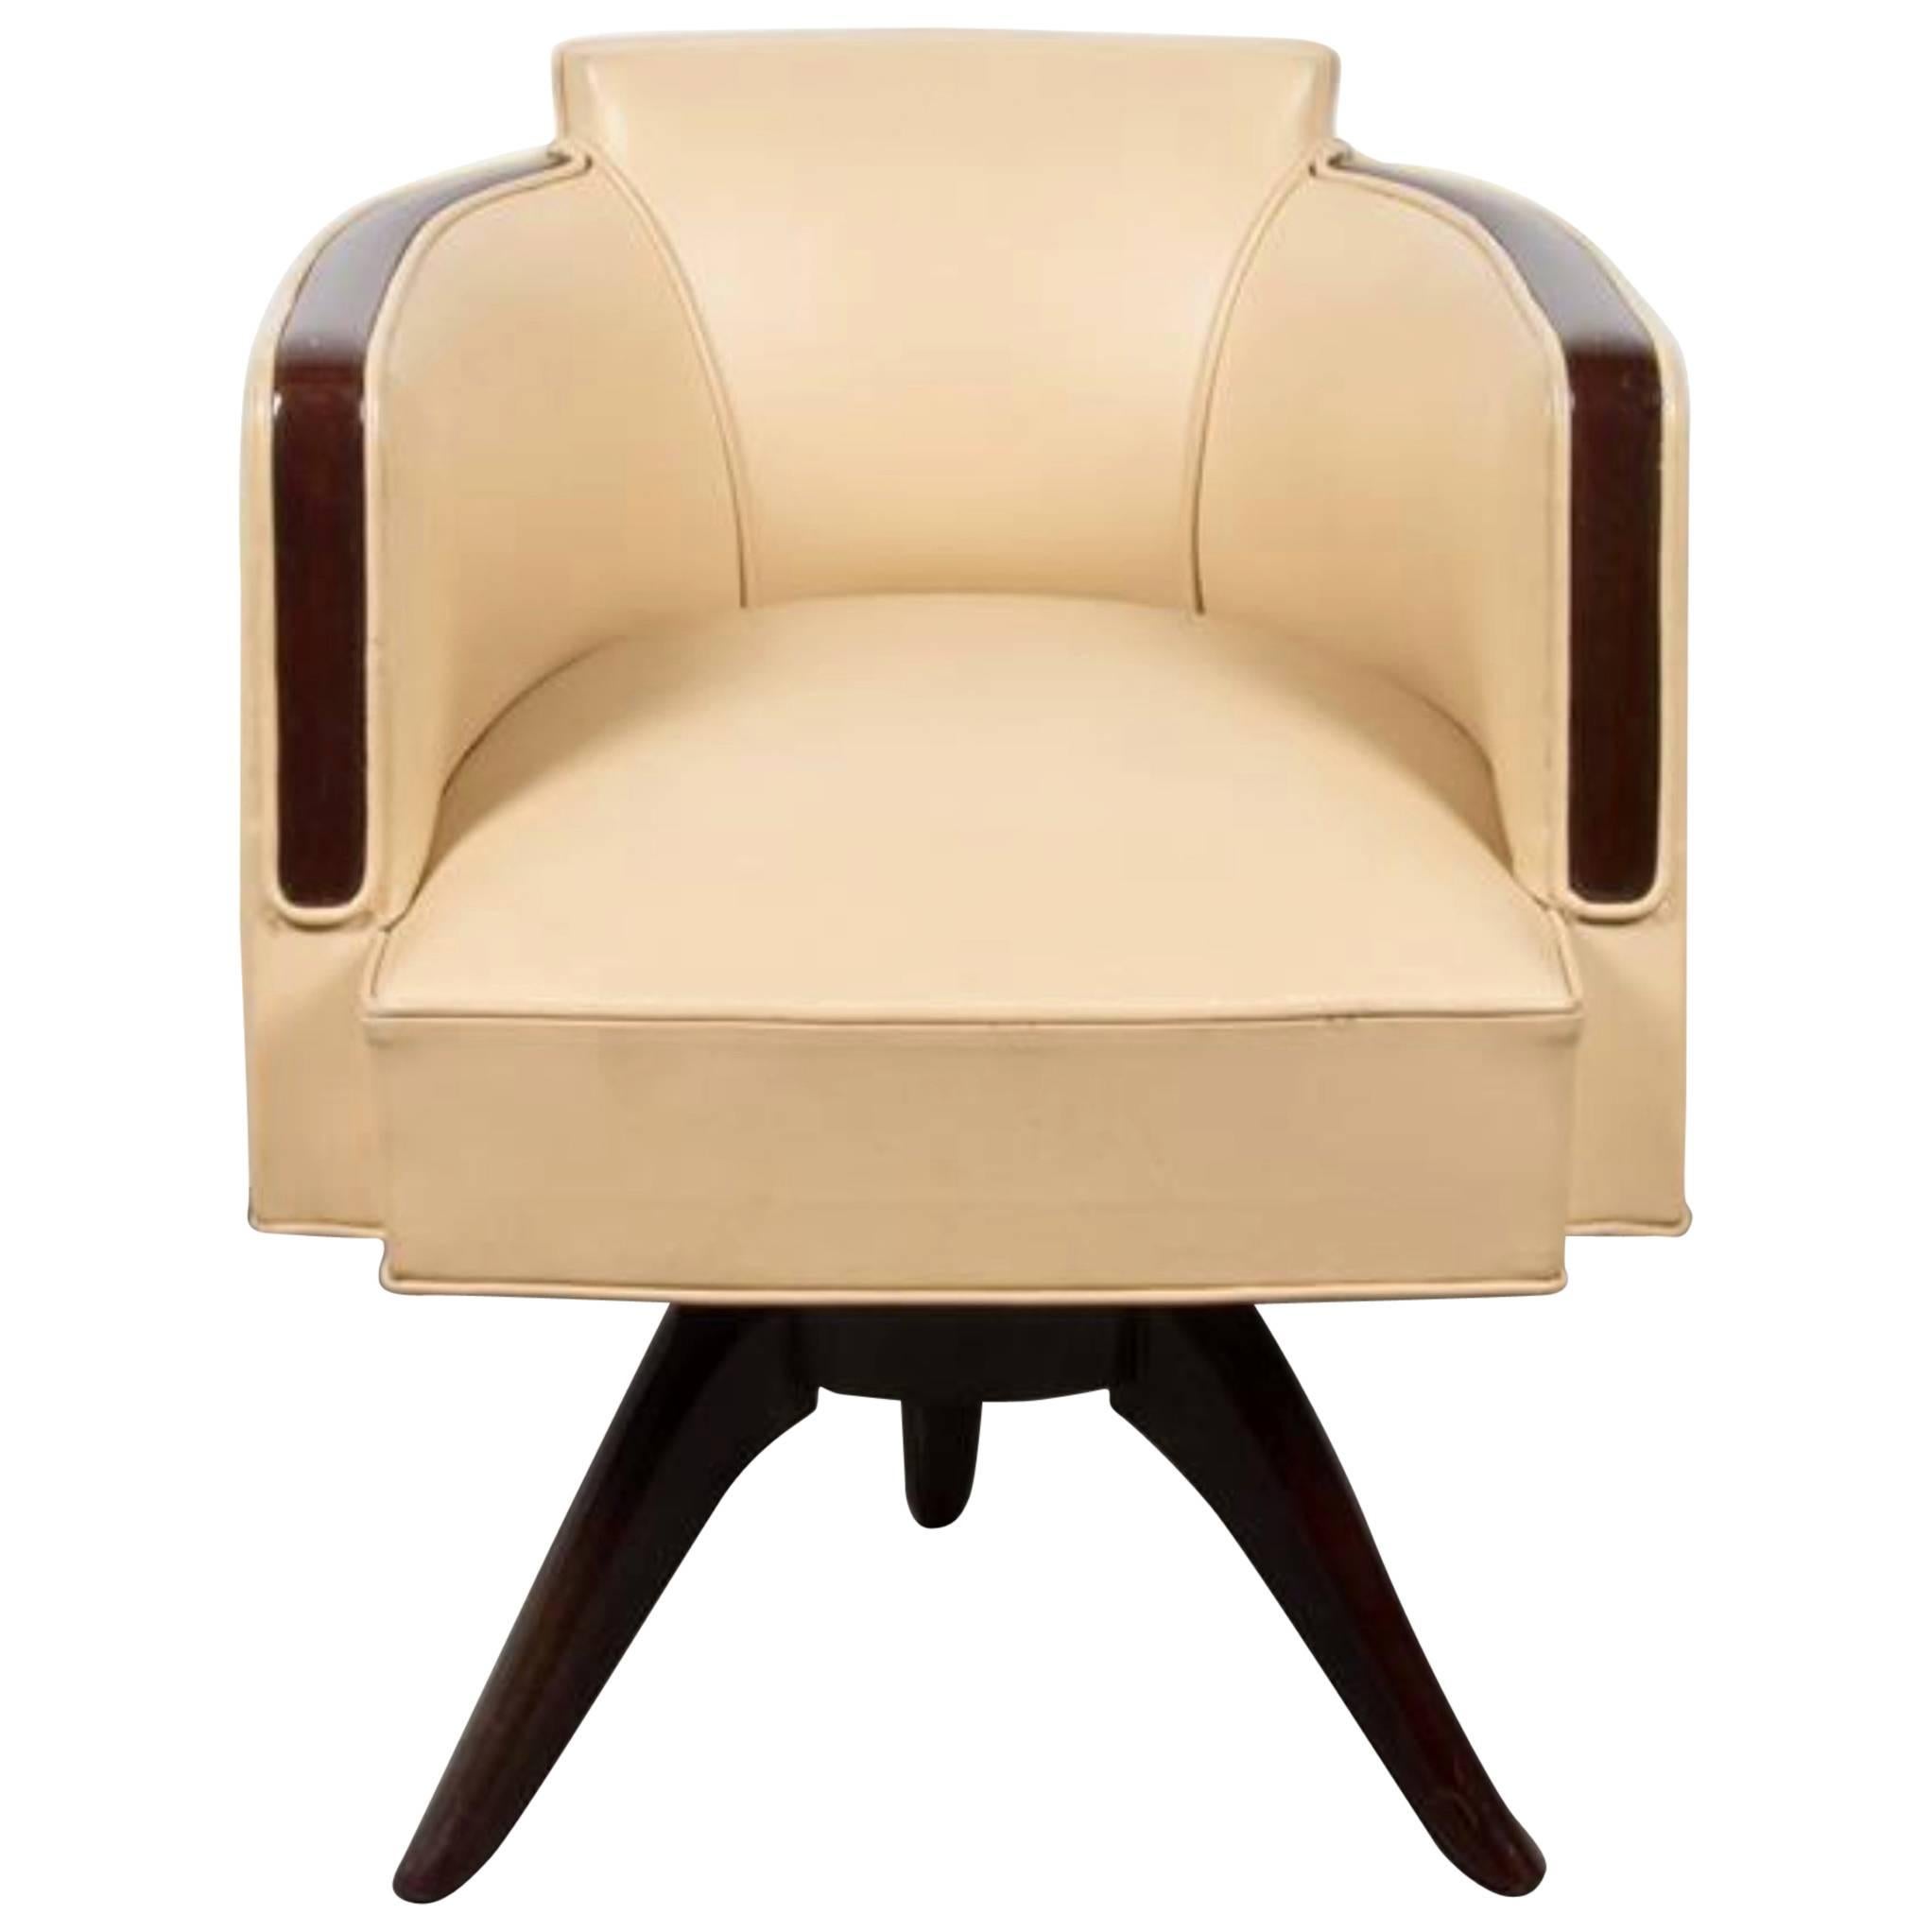 Very Chic Art Deco Style Armchair or Desk Chair For Sale